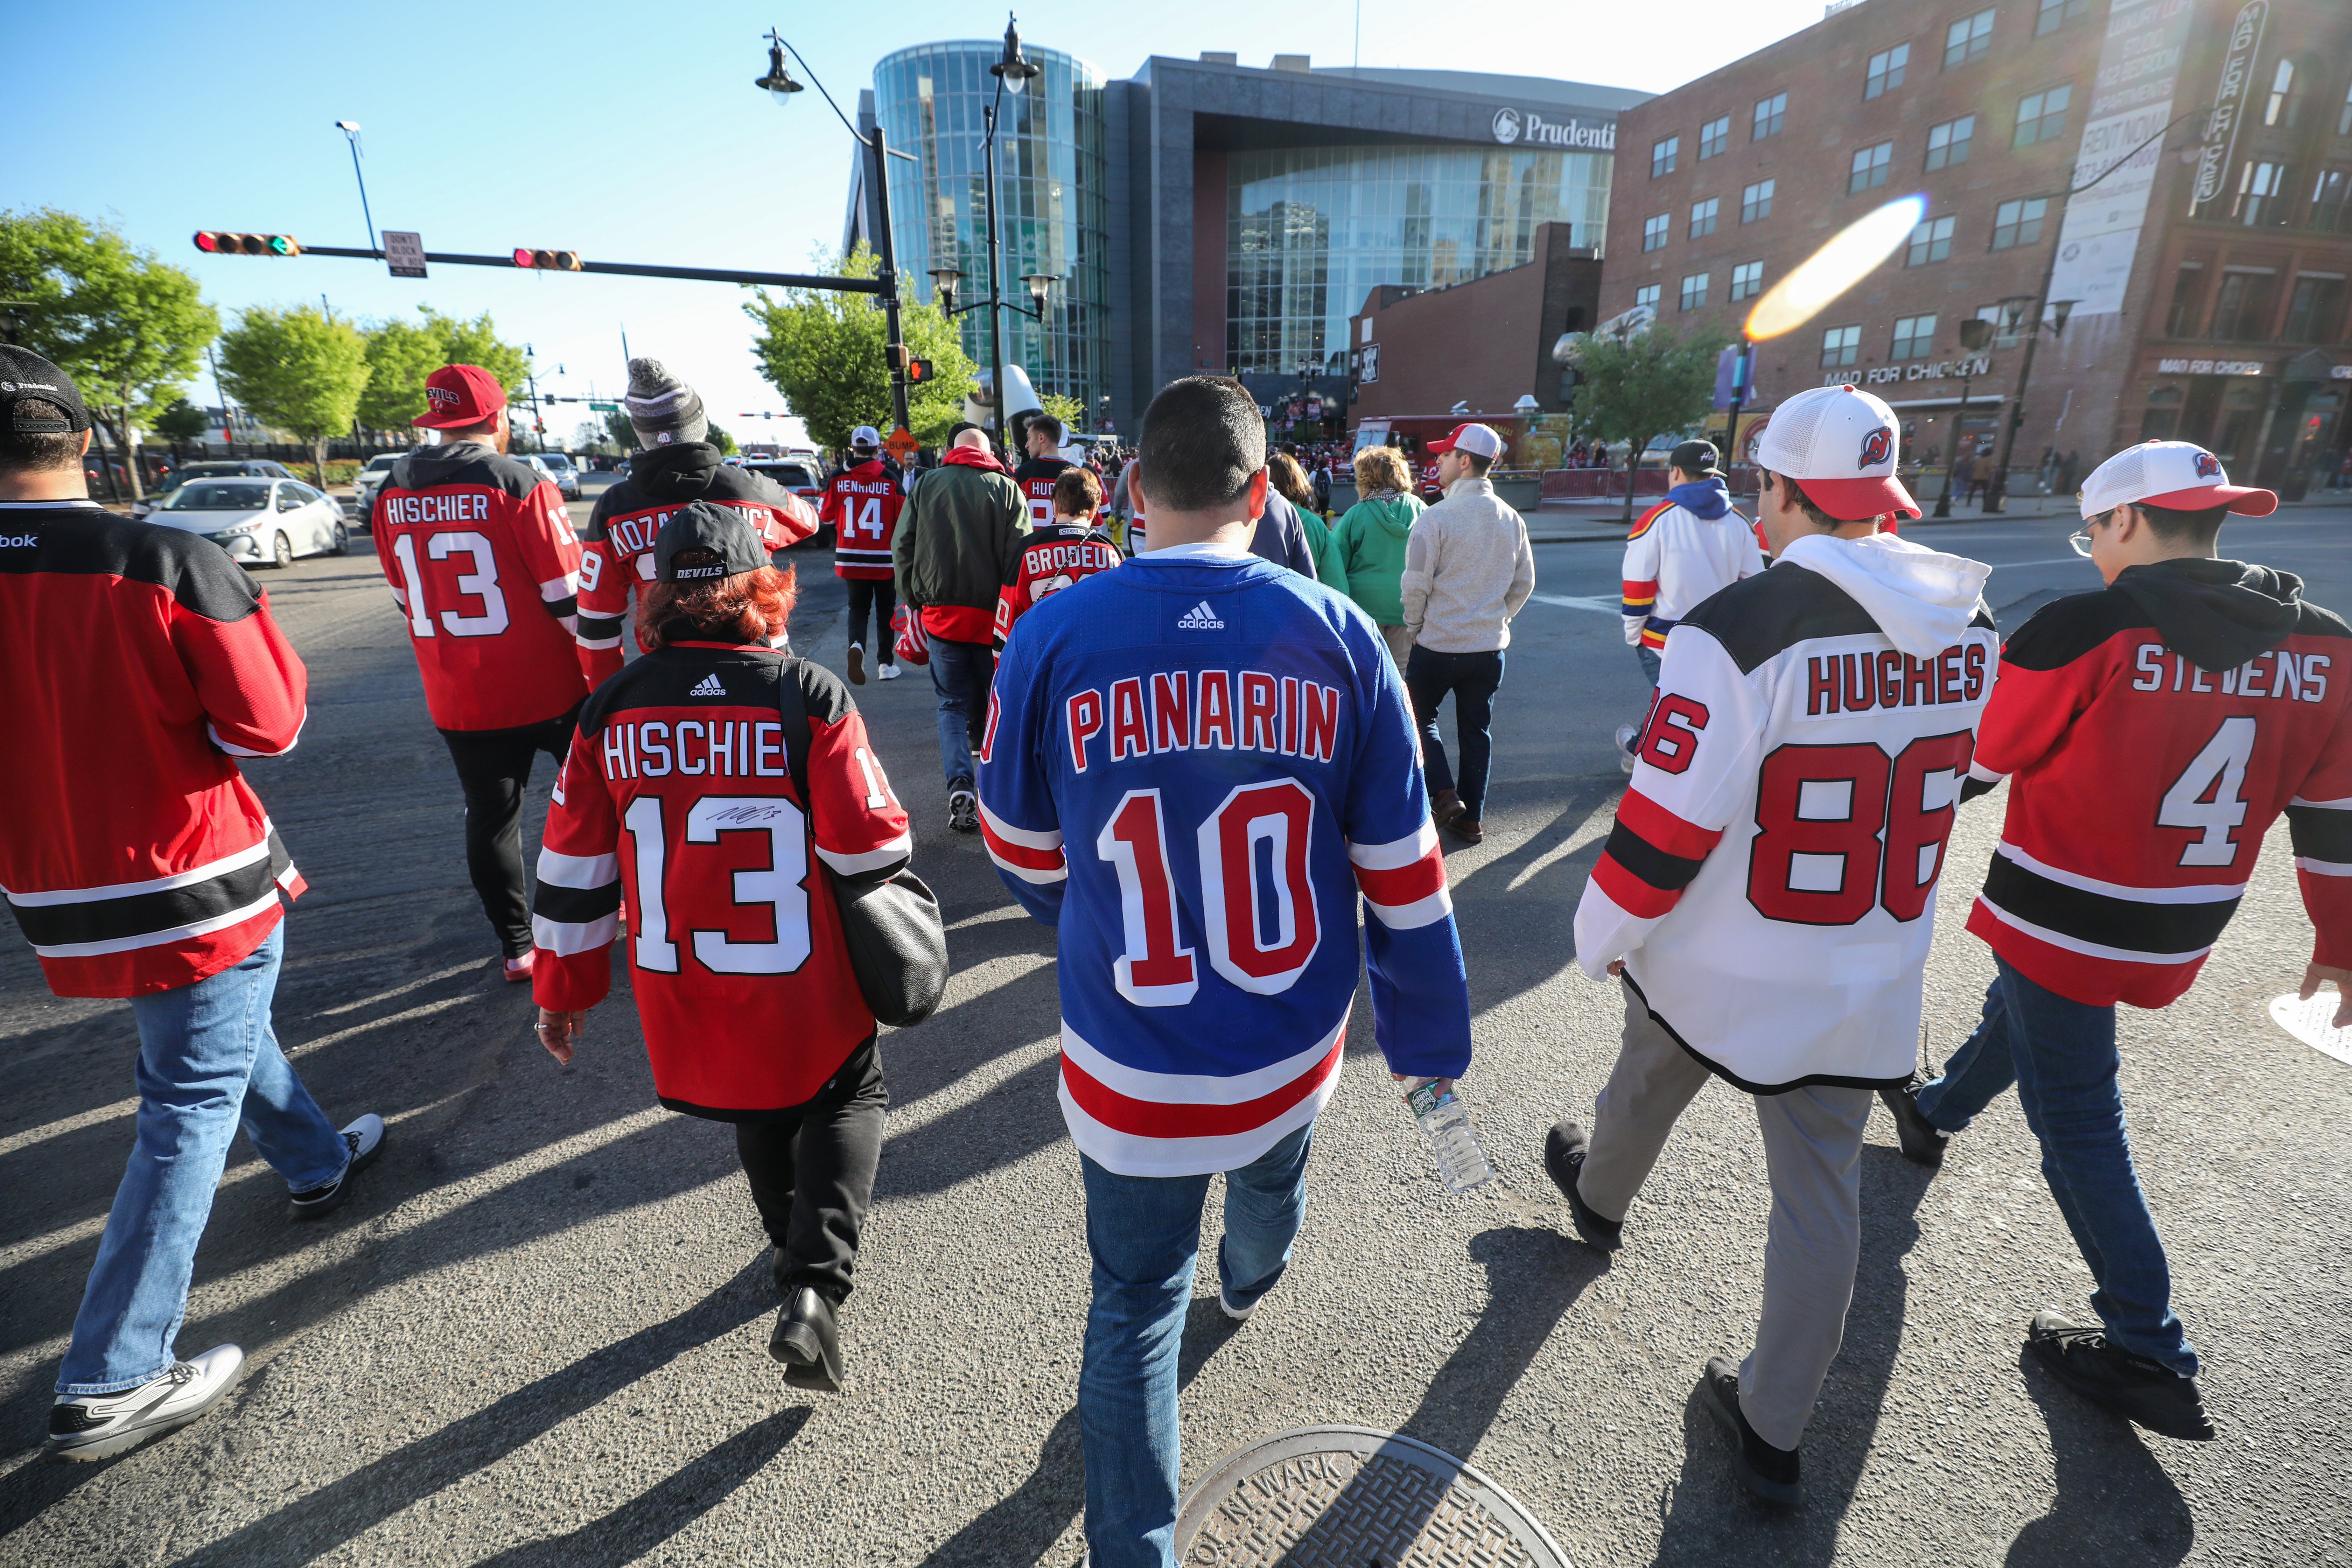 Fans walk along Market Street toward Prudential Center after getting off a train at Newark Penn Station on Tuesday, April 18, 2023 in Newark, N.J. The New York Rangers beat the New Jersey Devils, 5-1, in Game 1 of the NHL Stanley Cup playoffs.